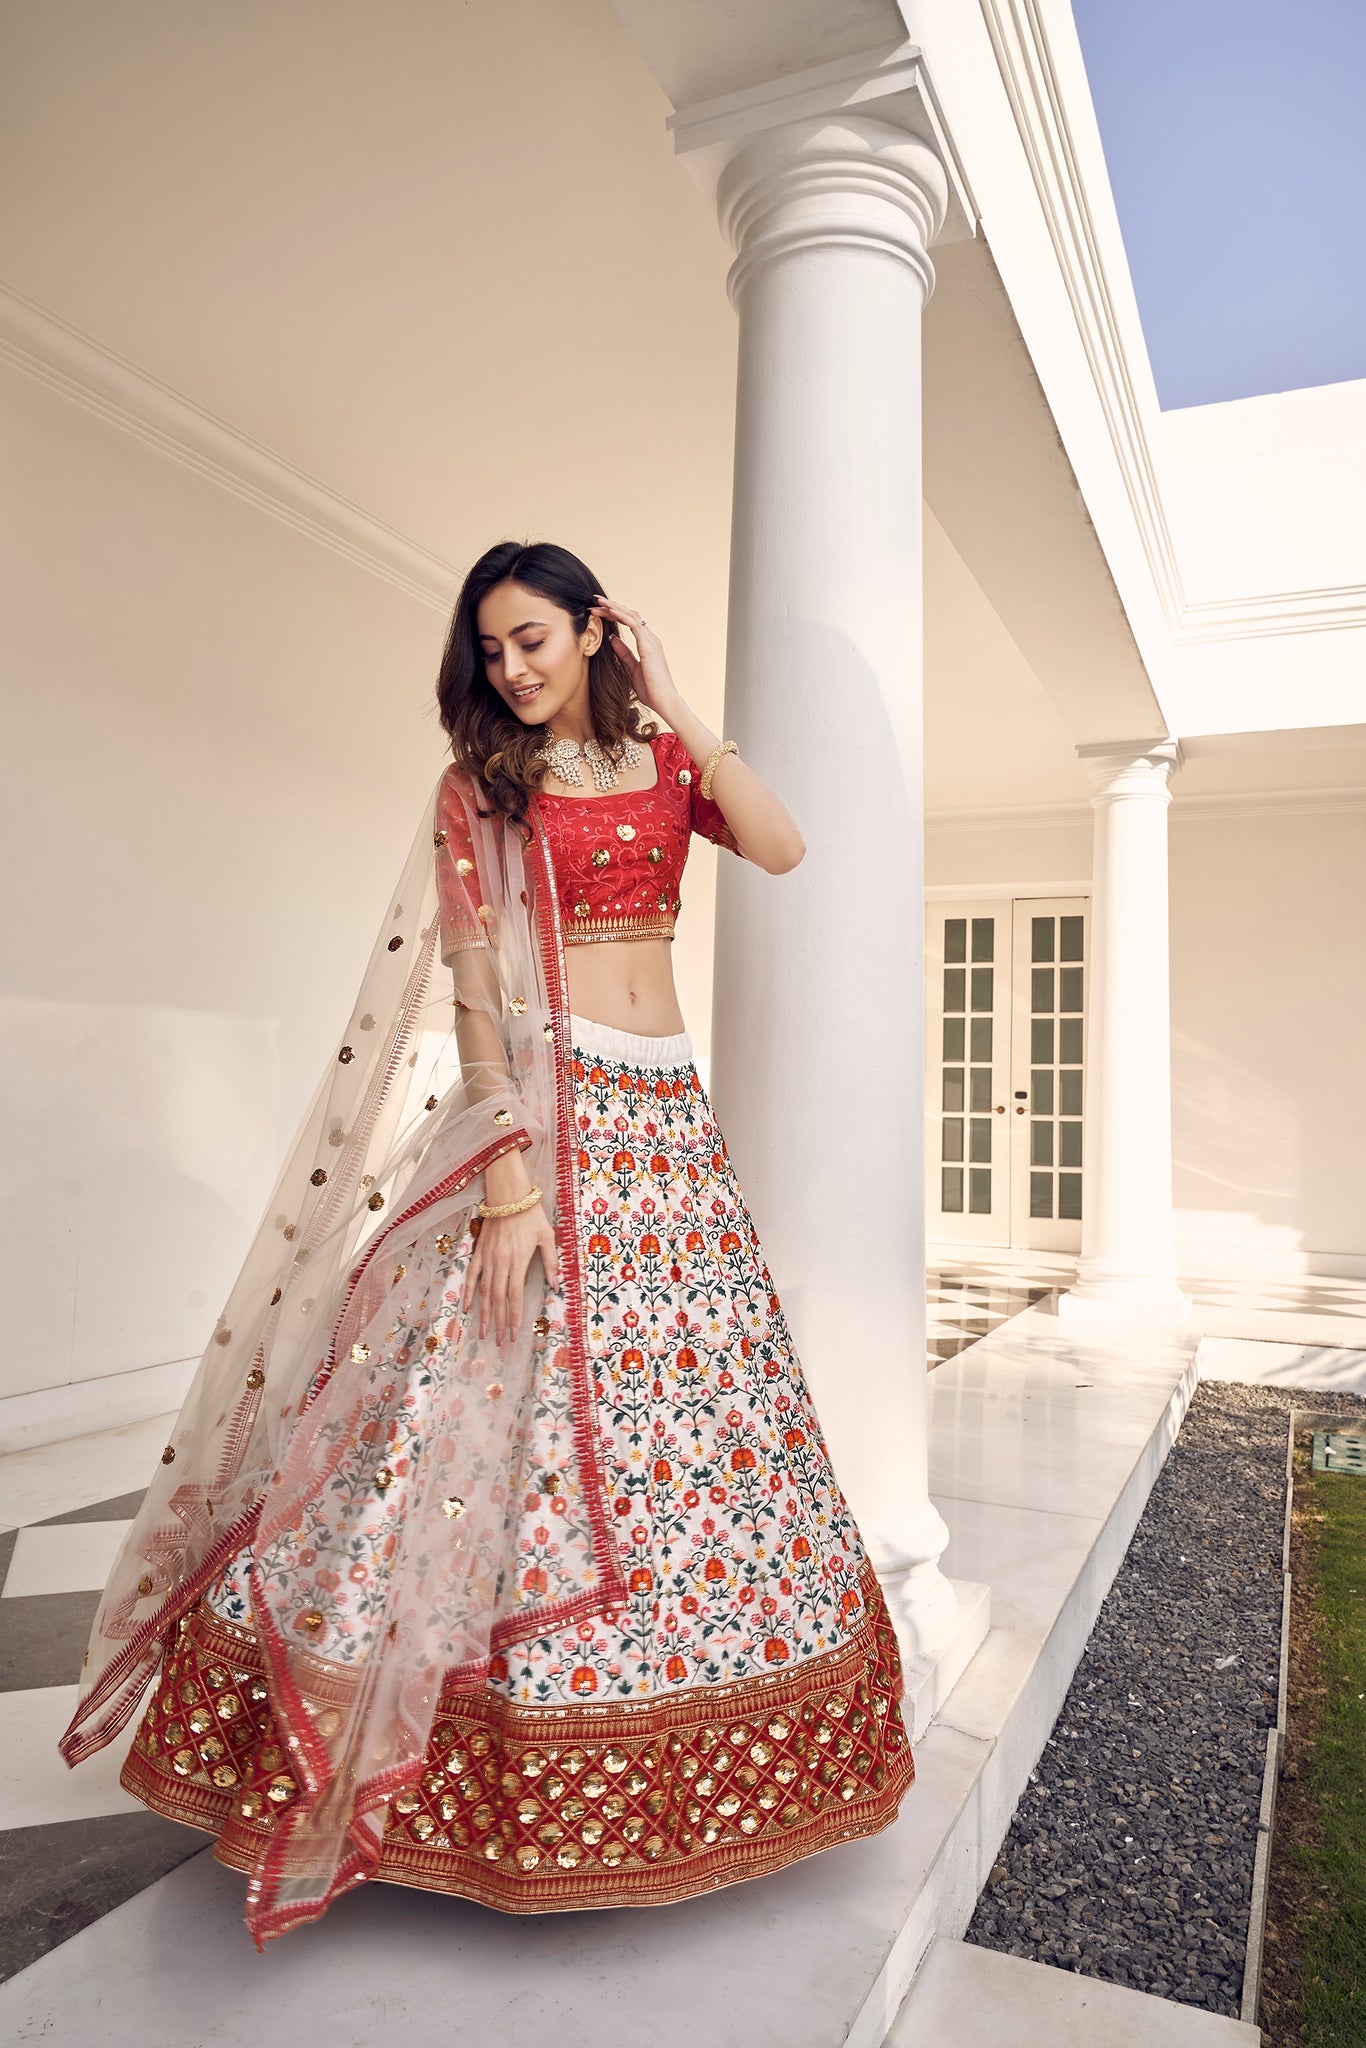 New) Party Wear Traditional Crop Top Lehenga 2021 [40% OFF]